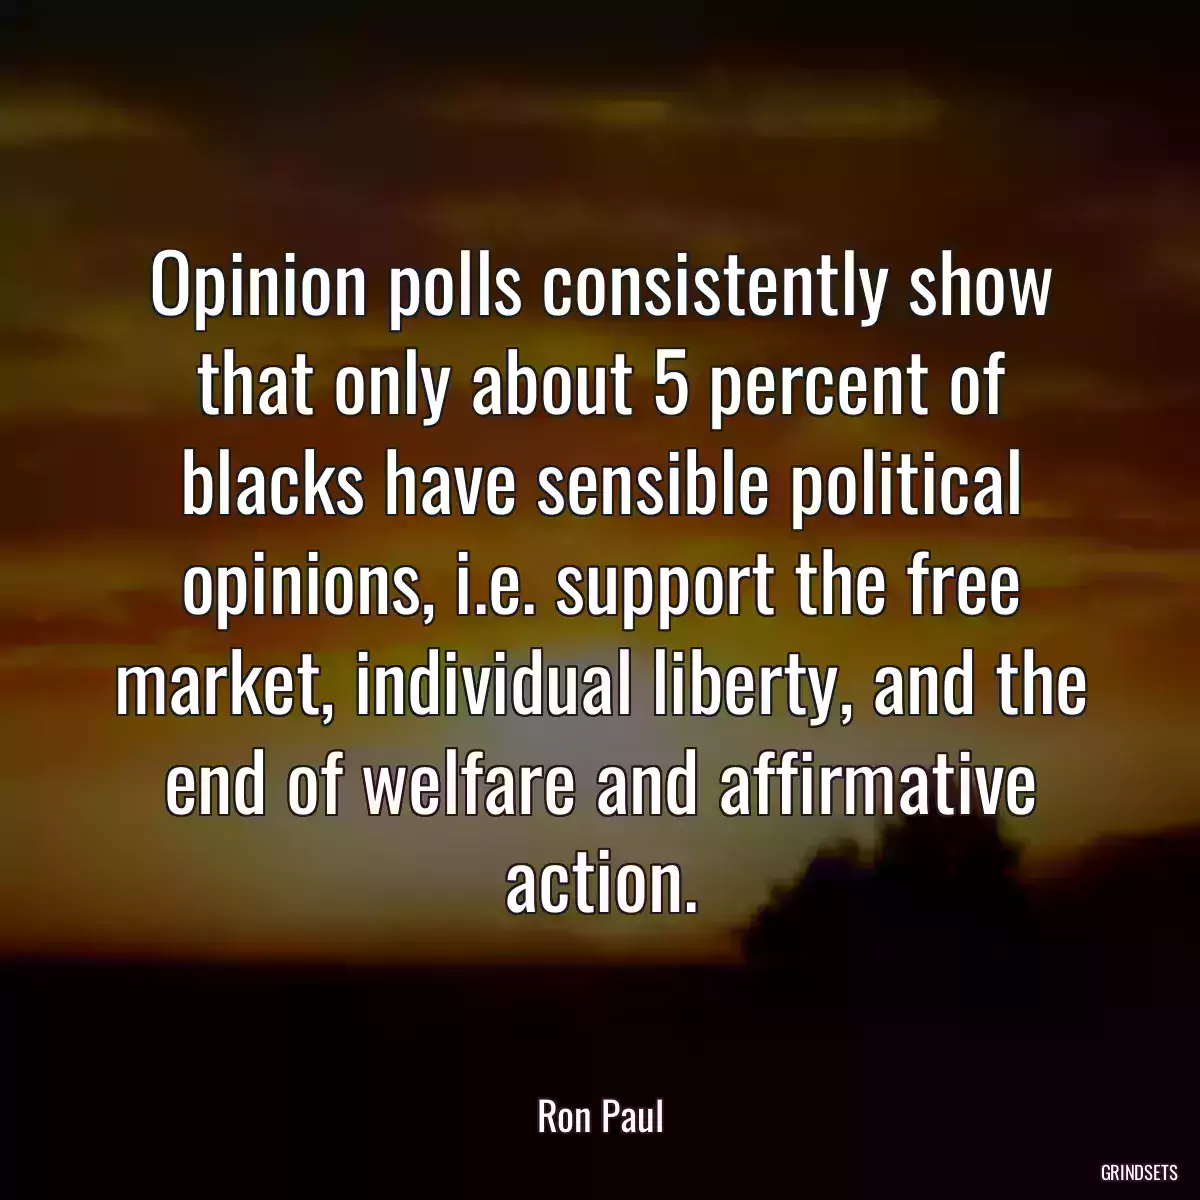 Opinion polls consistently show that only about 5 percent of blacks have sensible political opinions, i.e. support the free market, individual liberty, and the end of welfare and affirmative action.